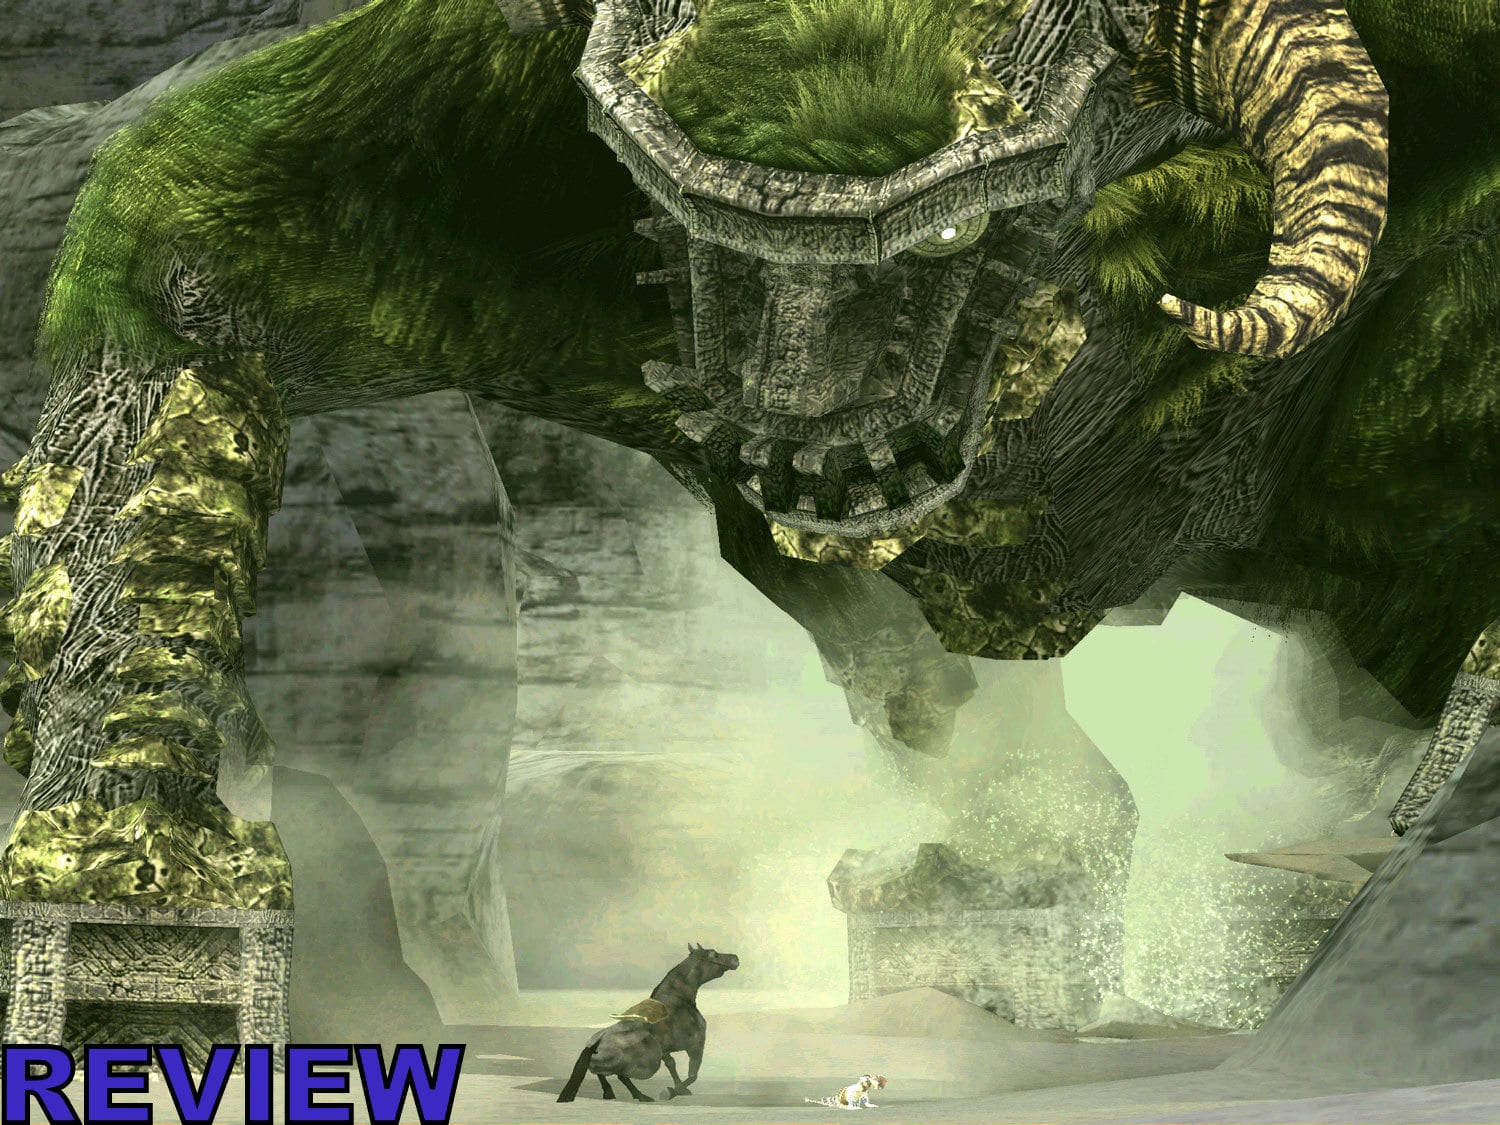 Ico and Shadow of the Colossus Collection Review - Time Can't